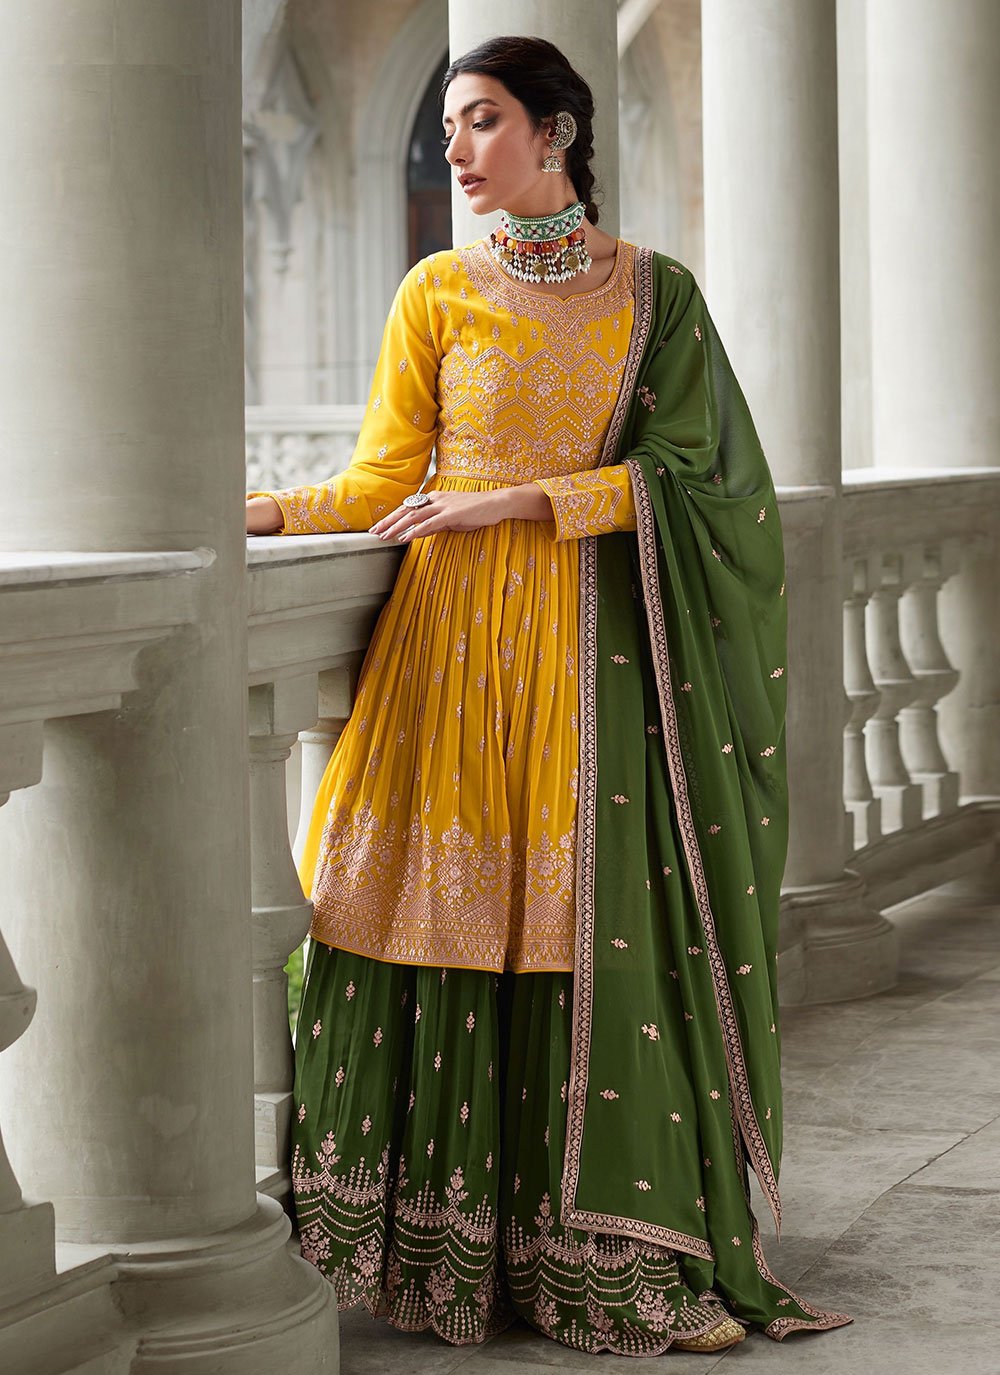 Black and yellow salwar suit. | Trendy outfits indian, Black punjabi suit,  Black salwar suit